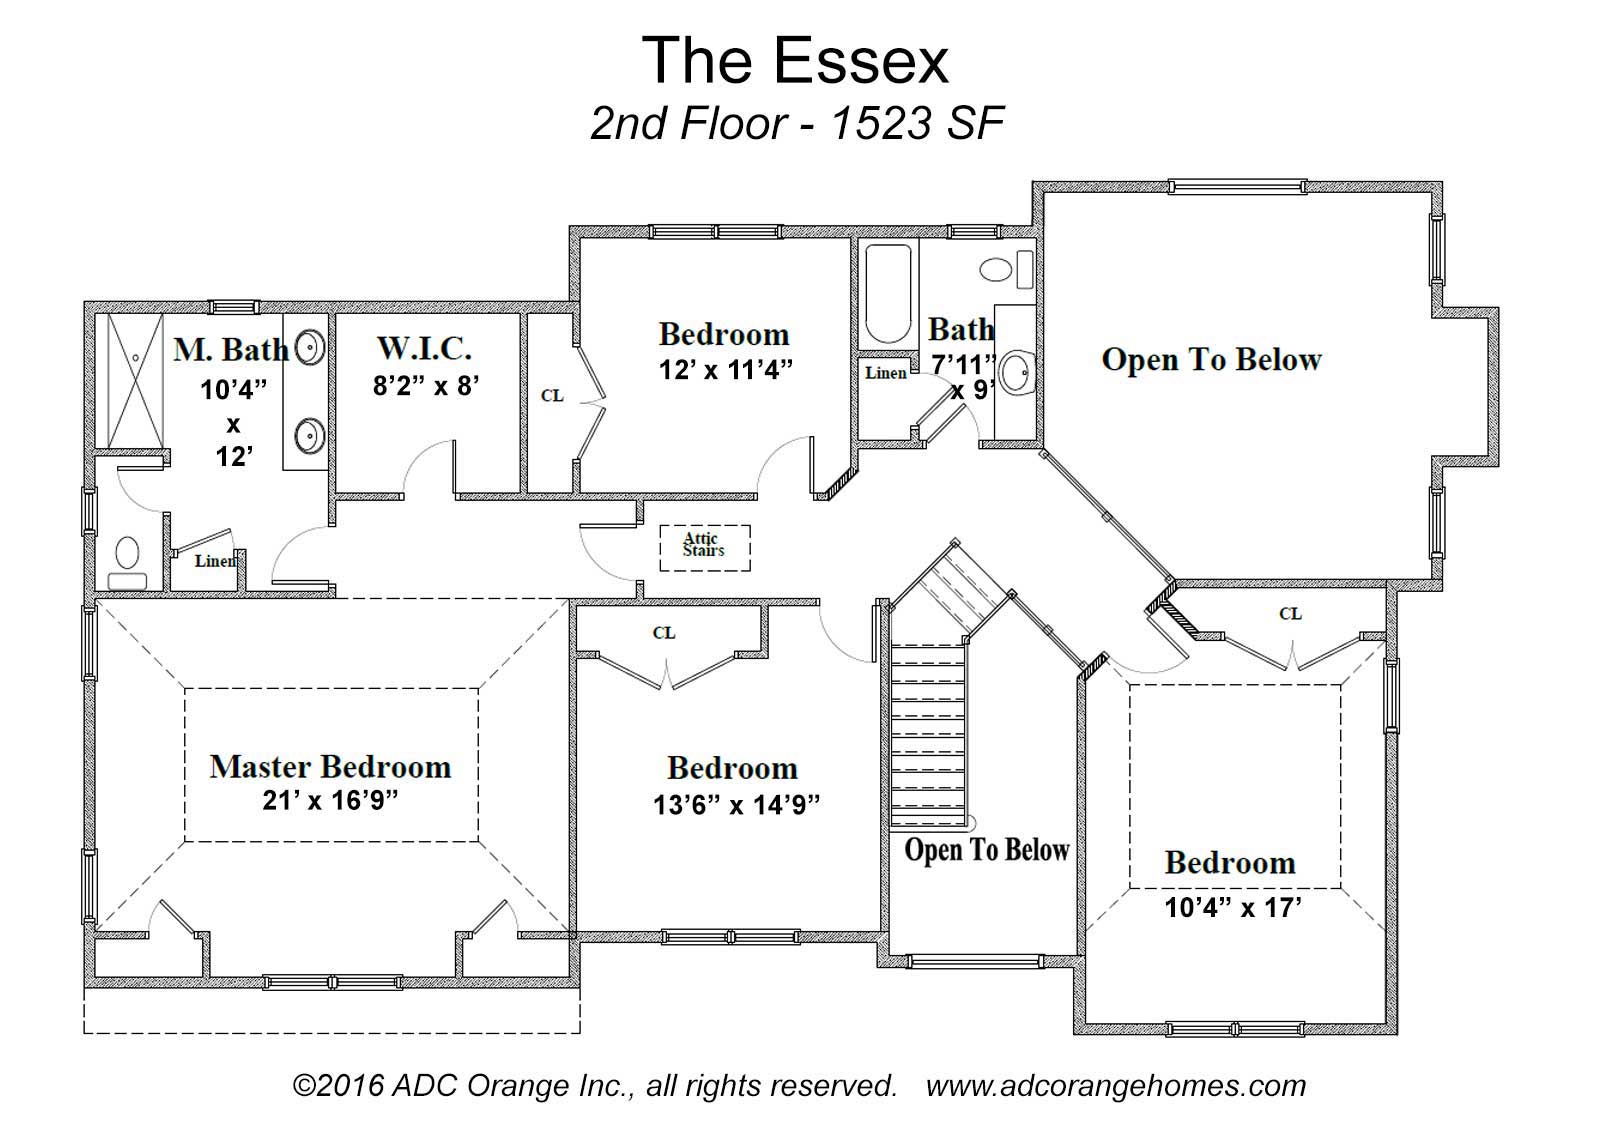 2nd Floor Plan for Essex - New Home in Orange County, New York